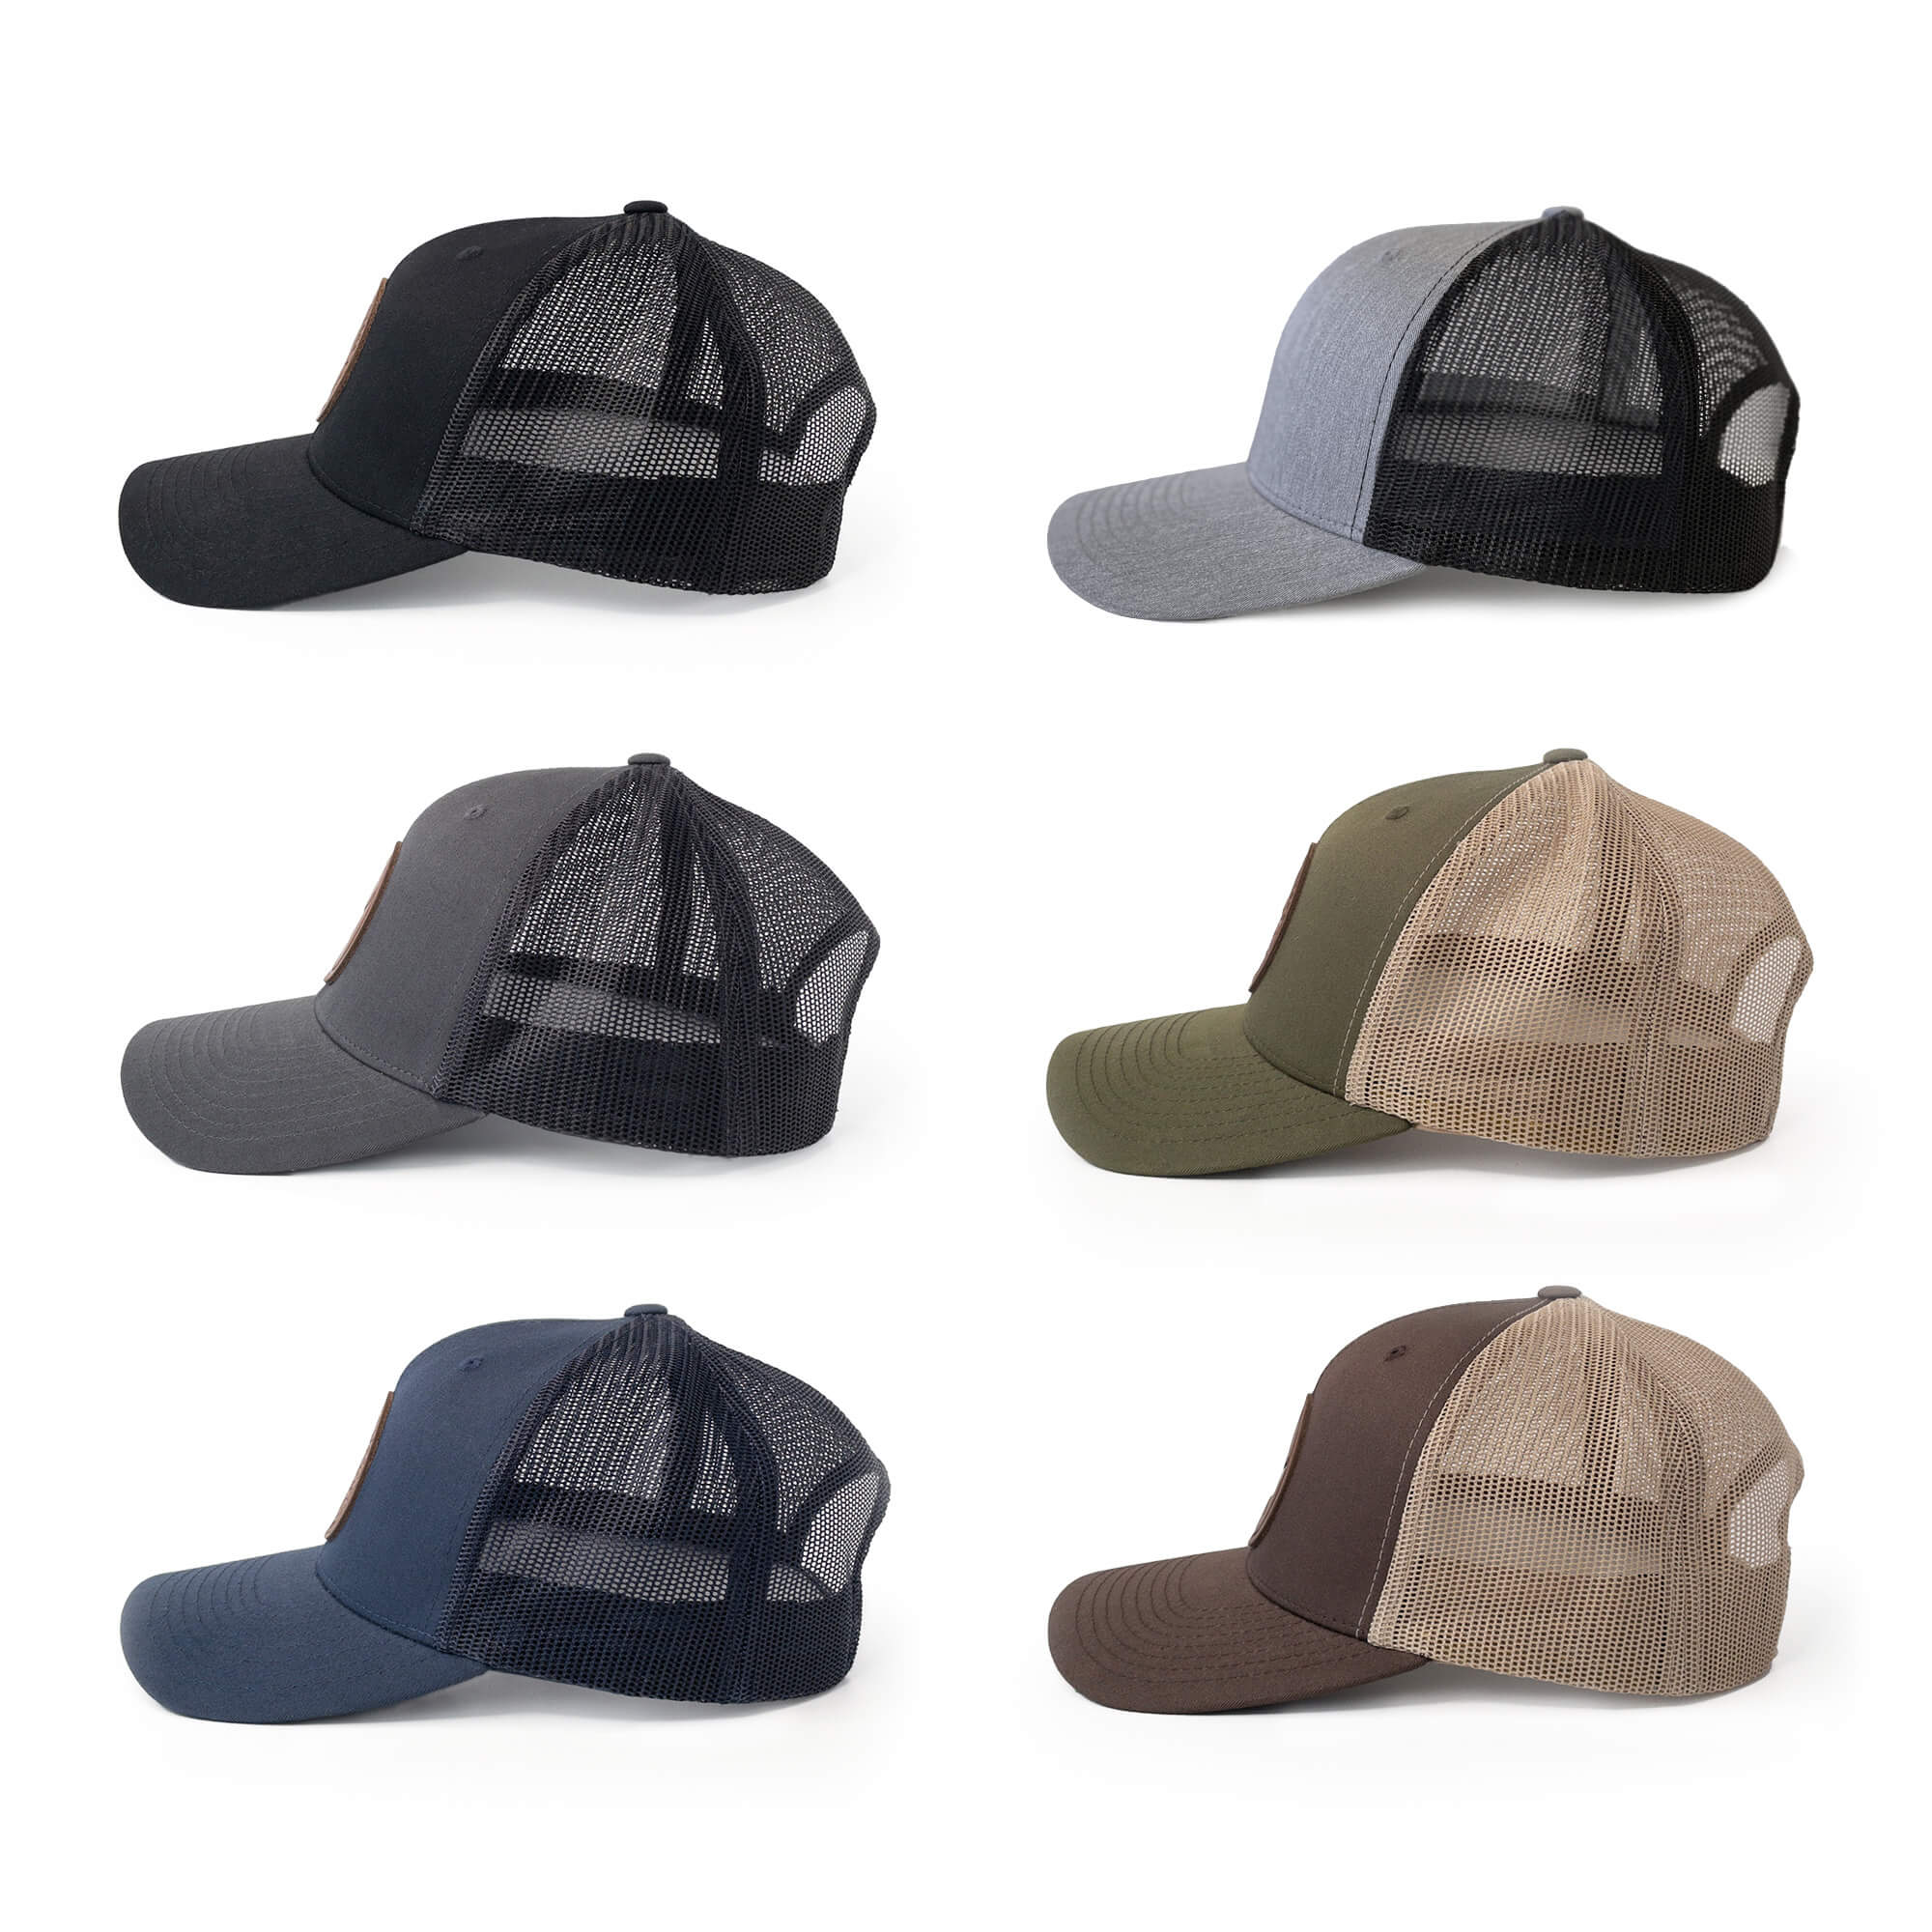 Leather patch trucker hats available in 6 colors | BLACK-005-005, CHARC-005-005, NAVY-005-005, HGREY-005-005, MOSS-005-005, BROWN-005-005